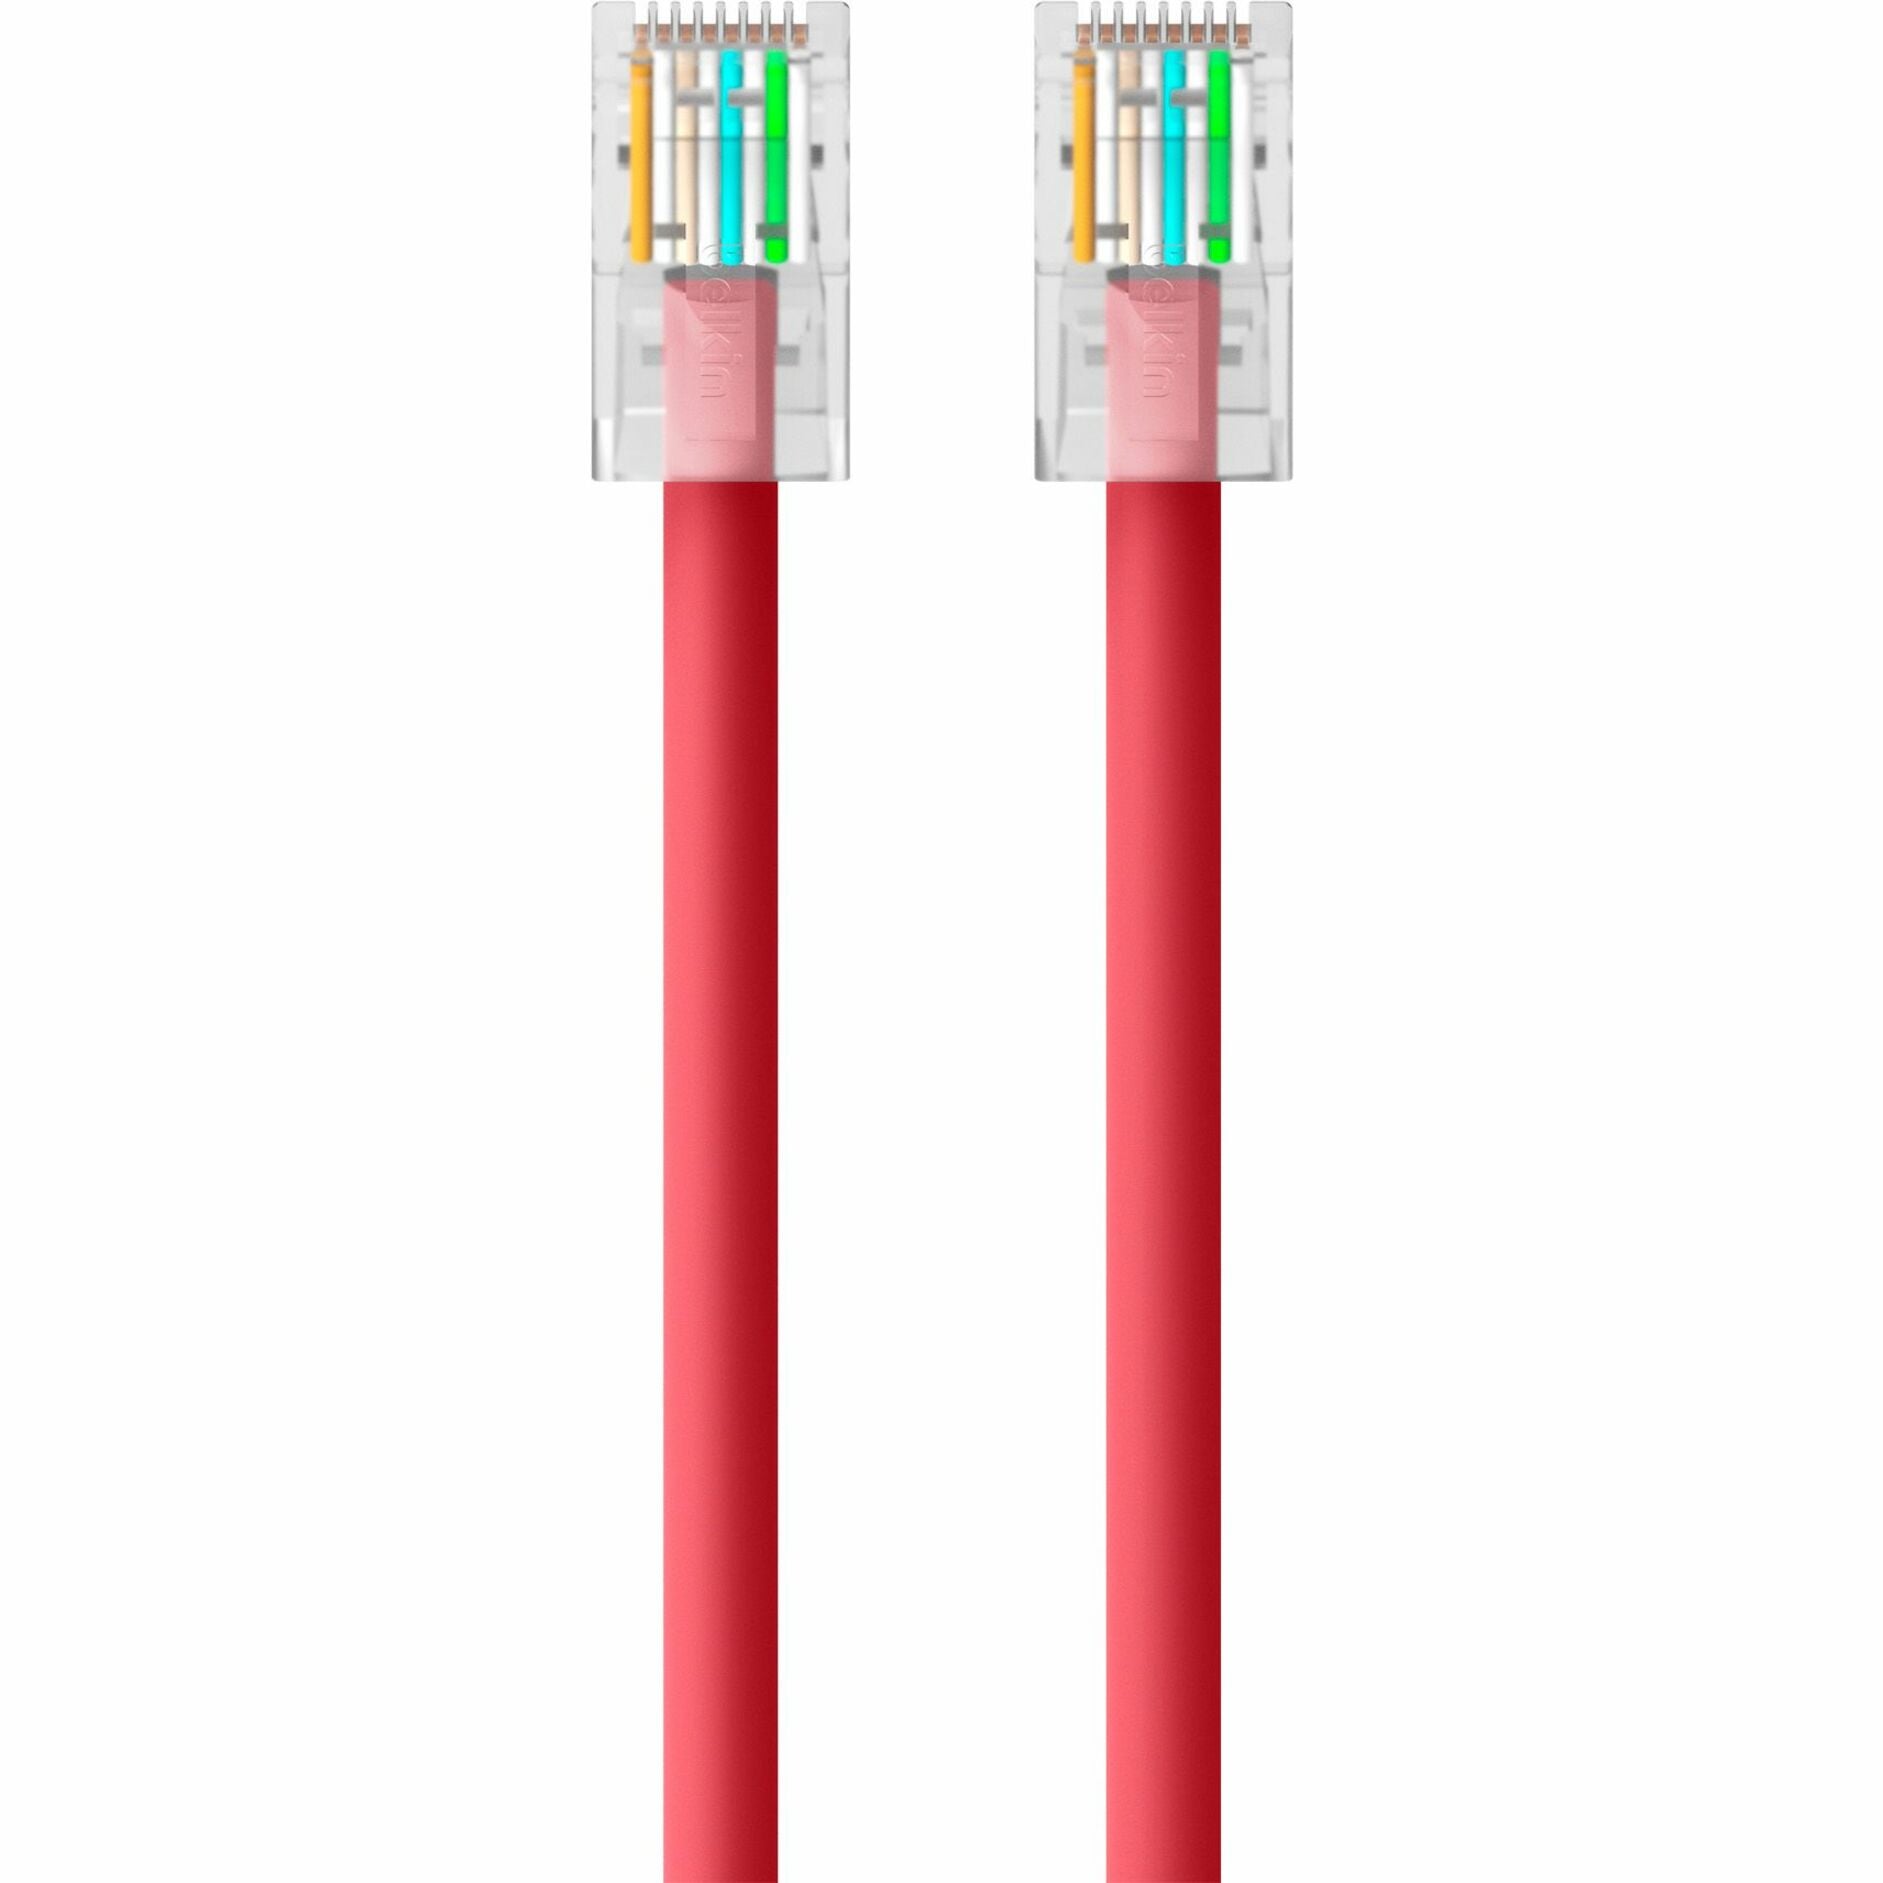 Belkin A3L791-12-RED RJ45 Category 5e Patch Cable, 12 ft, PowerSum Tested